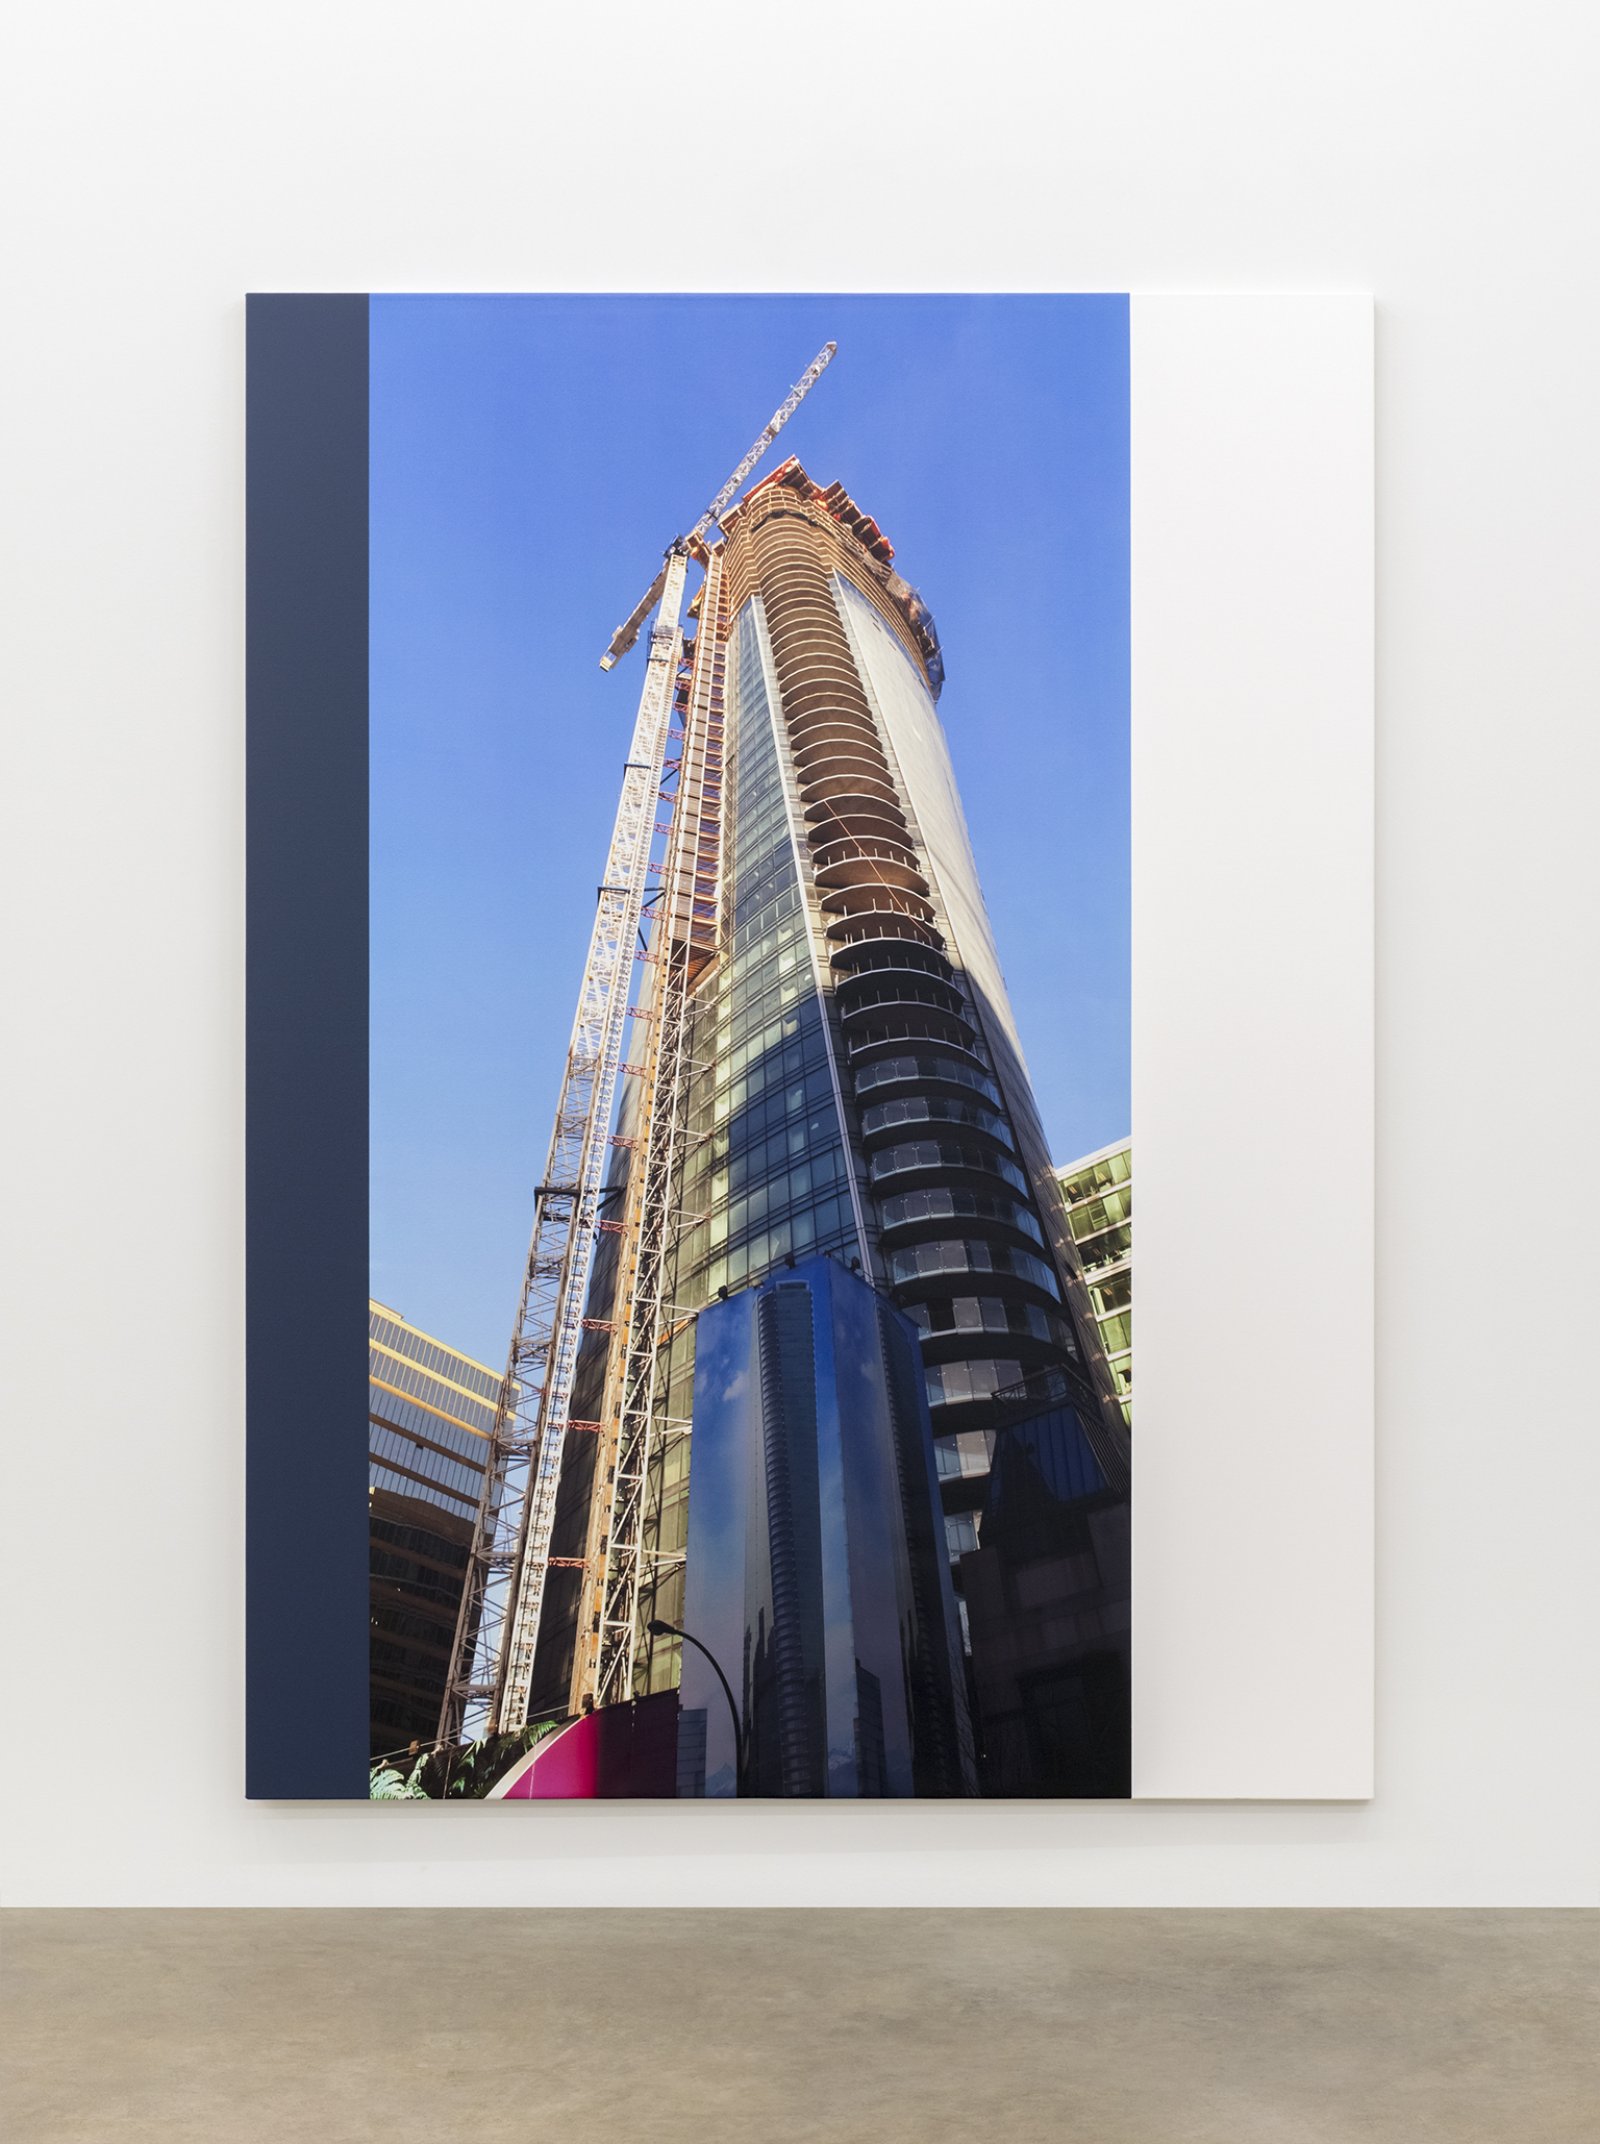 Ian Wallace, Construction Site (The Tower) I, 2015, photolaminate and acrylic on canvas, 96 x 72 in. (244 x 183 cm) by Ian Wallace